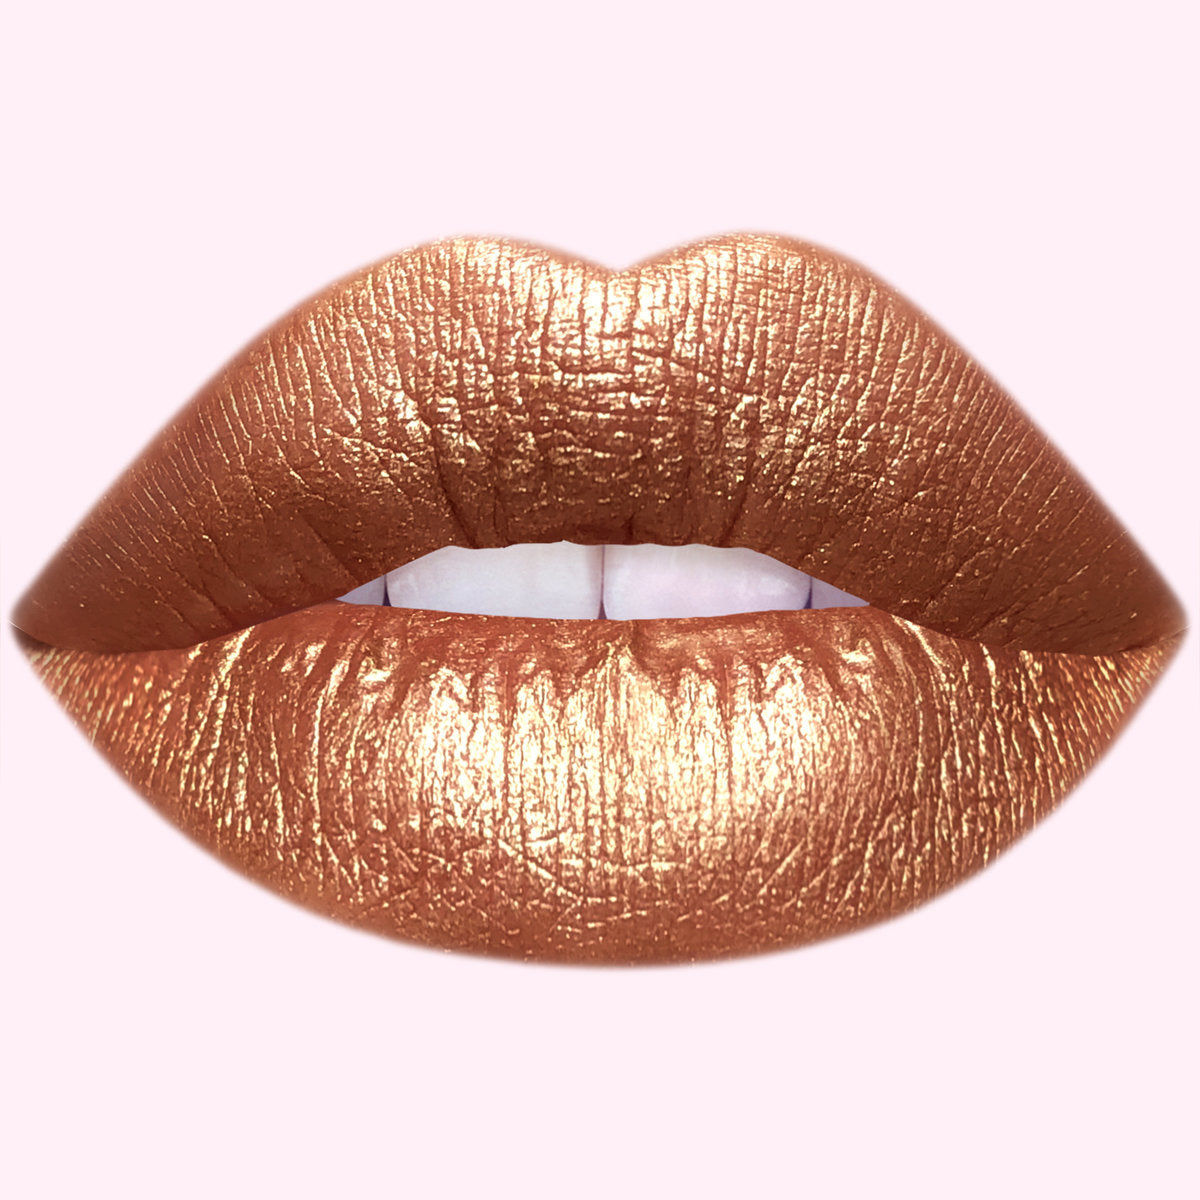 L105-02-0000_SUNKISSED_COCO_FROYO_LIP_SWATCH.jpg